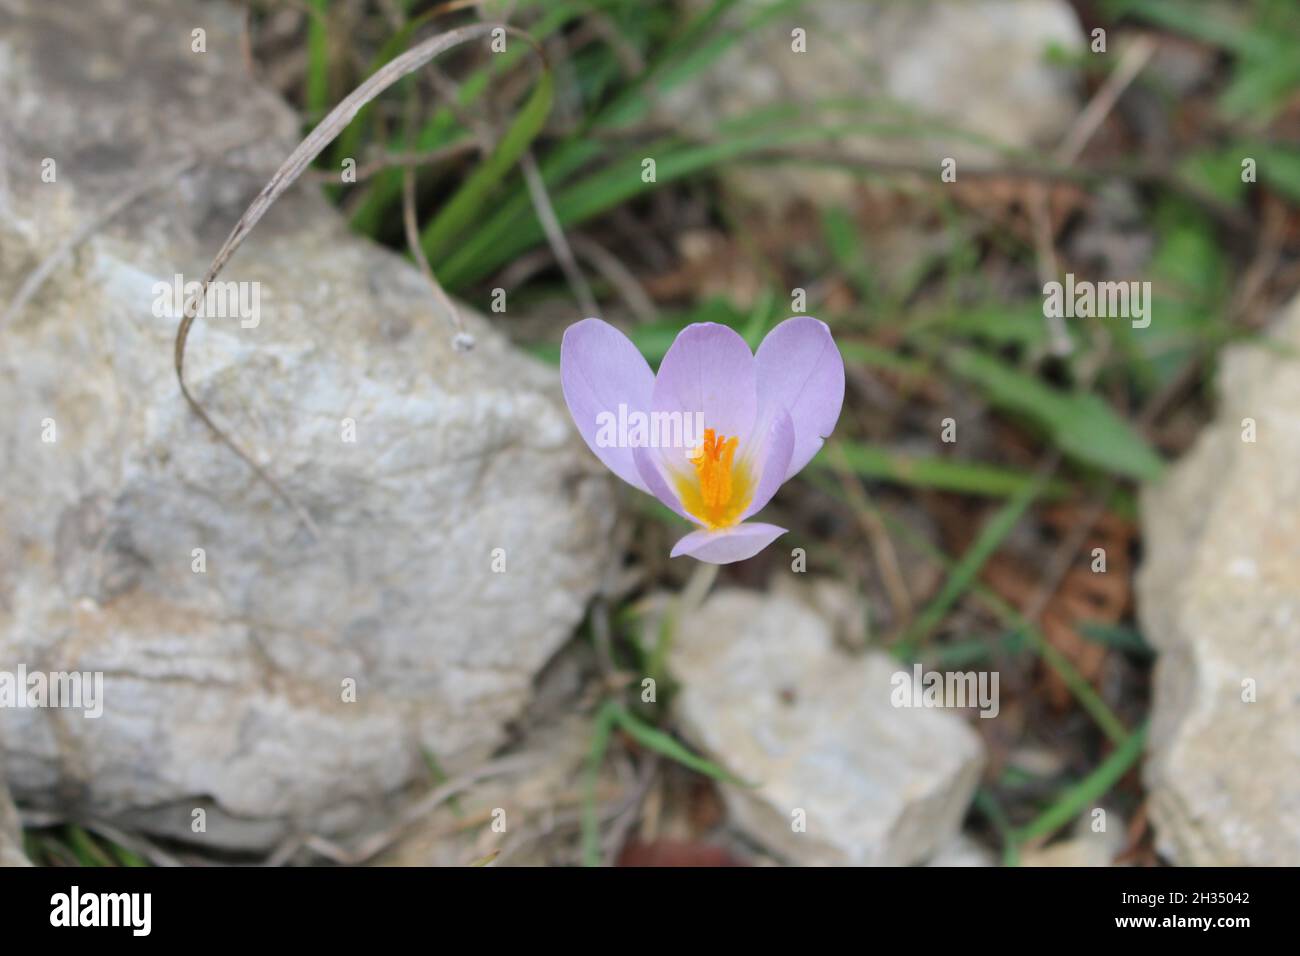 pure moroccan saffron be in shape of a rose Stock Photo